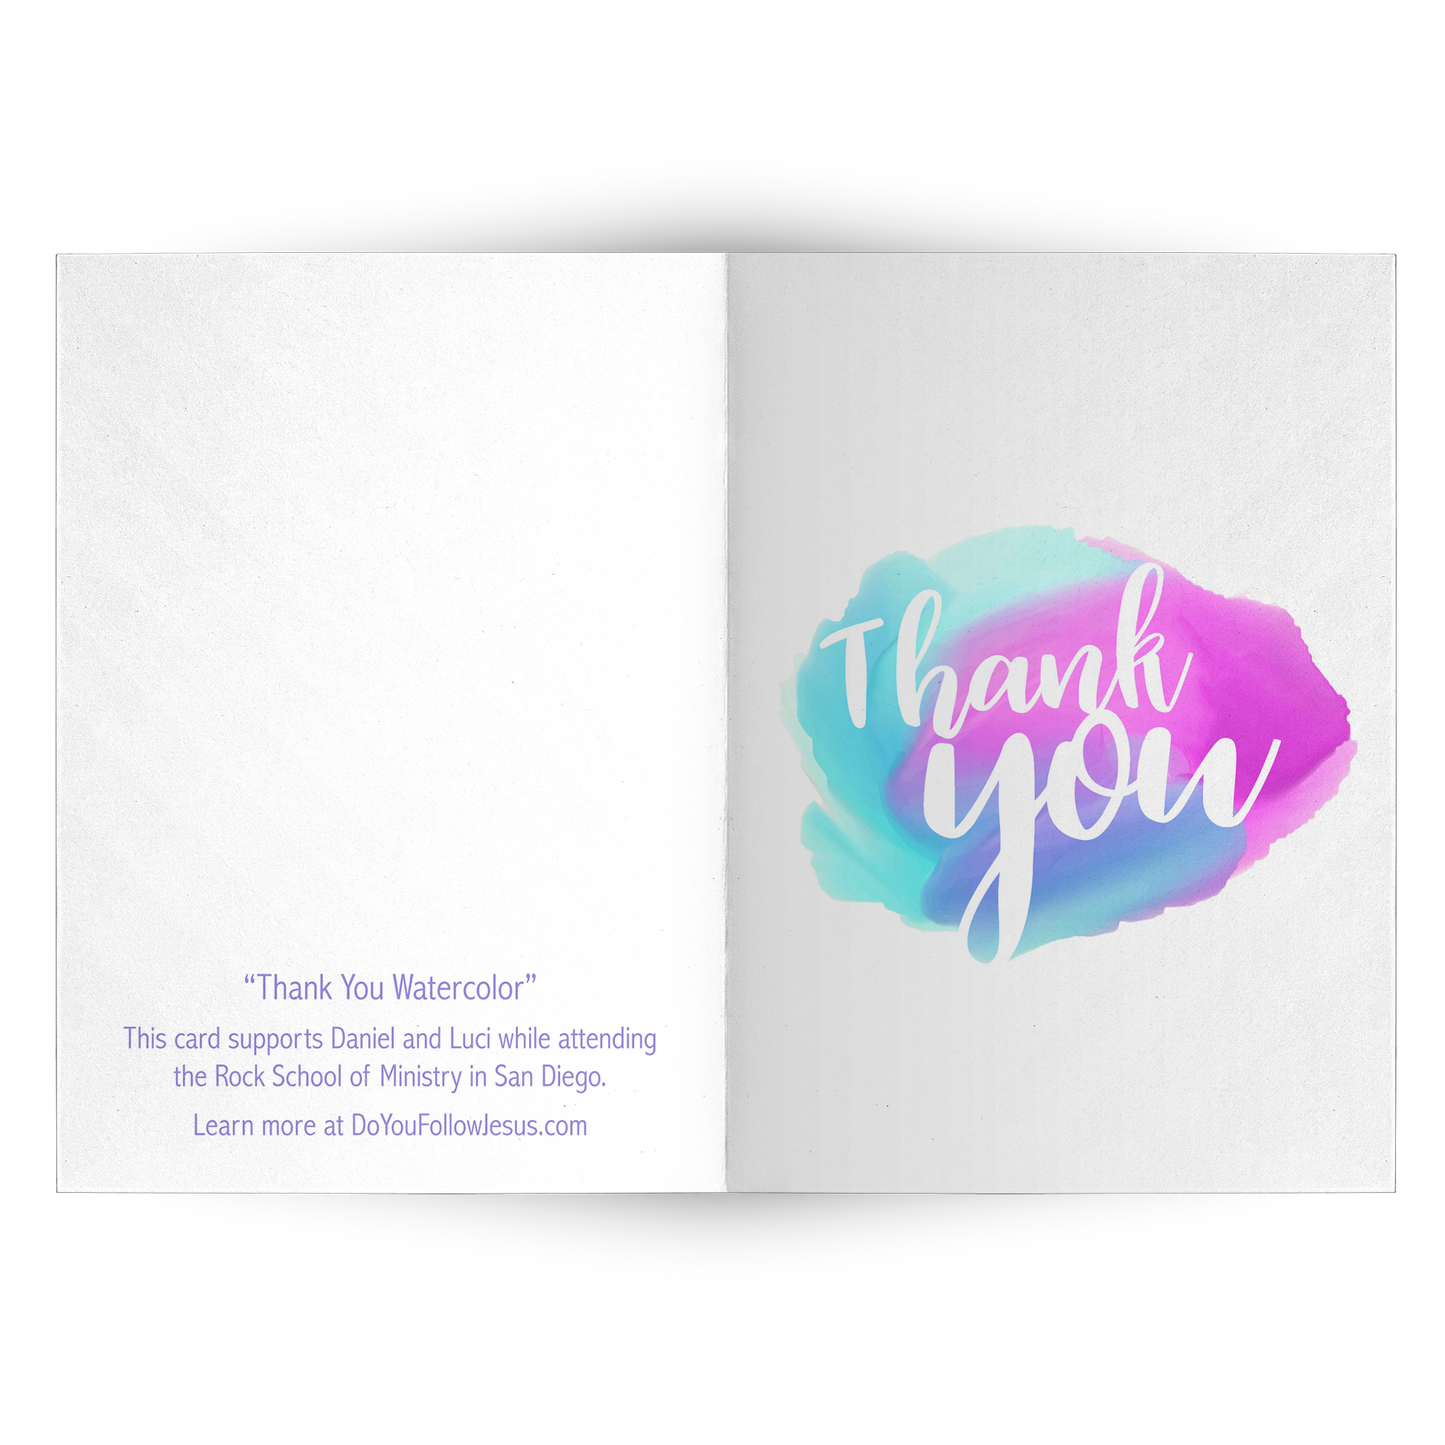 Thank You [Watercolor Blob] - Folded Note Card